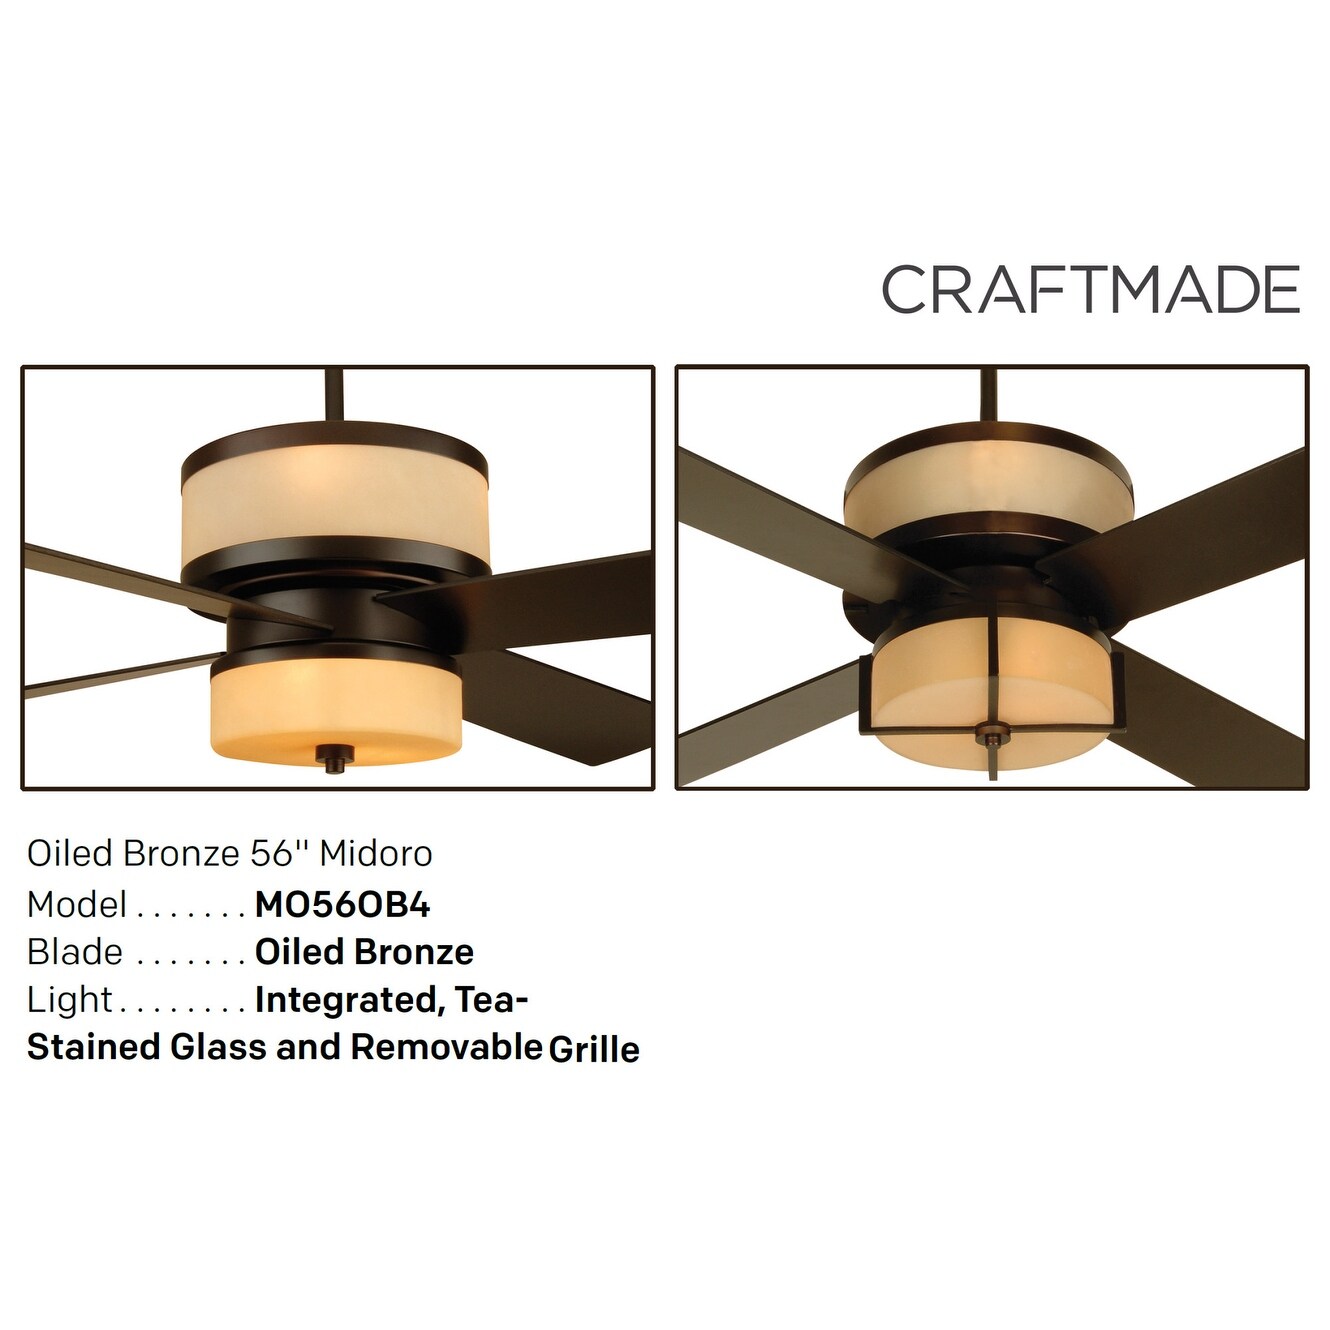 Craftmade Midoro Midoro 56 4 Blade Ceiling Fan Blades Remote Uplight And Downlight Included